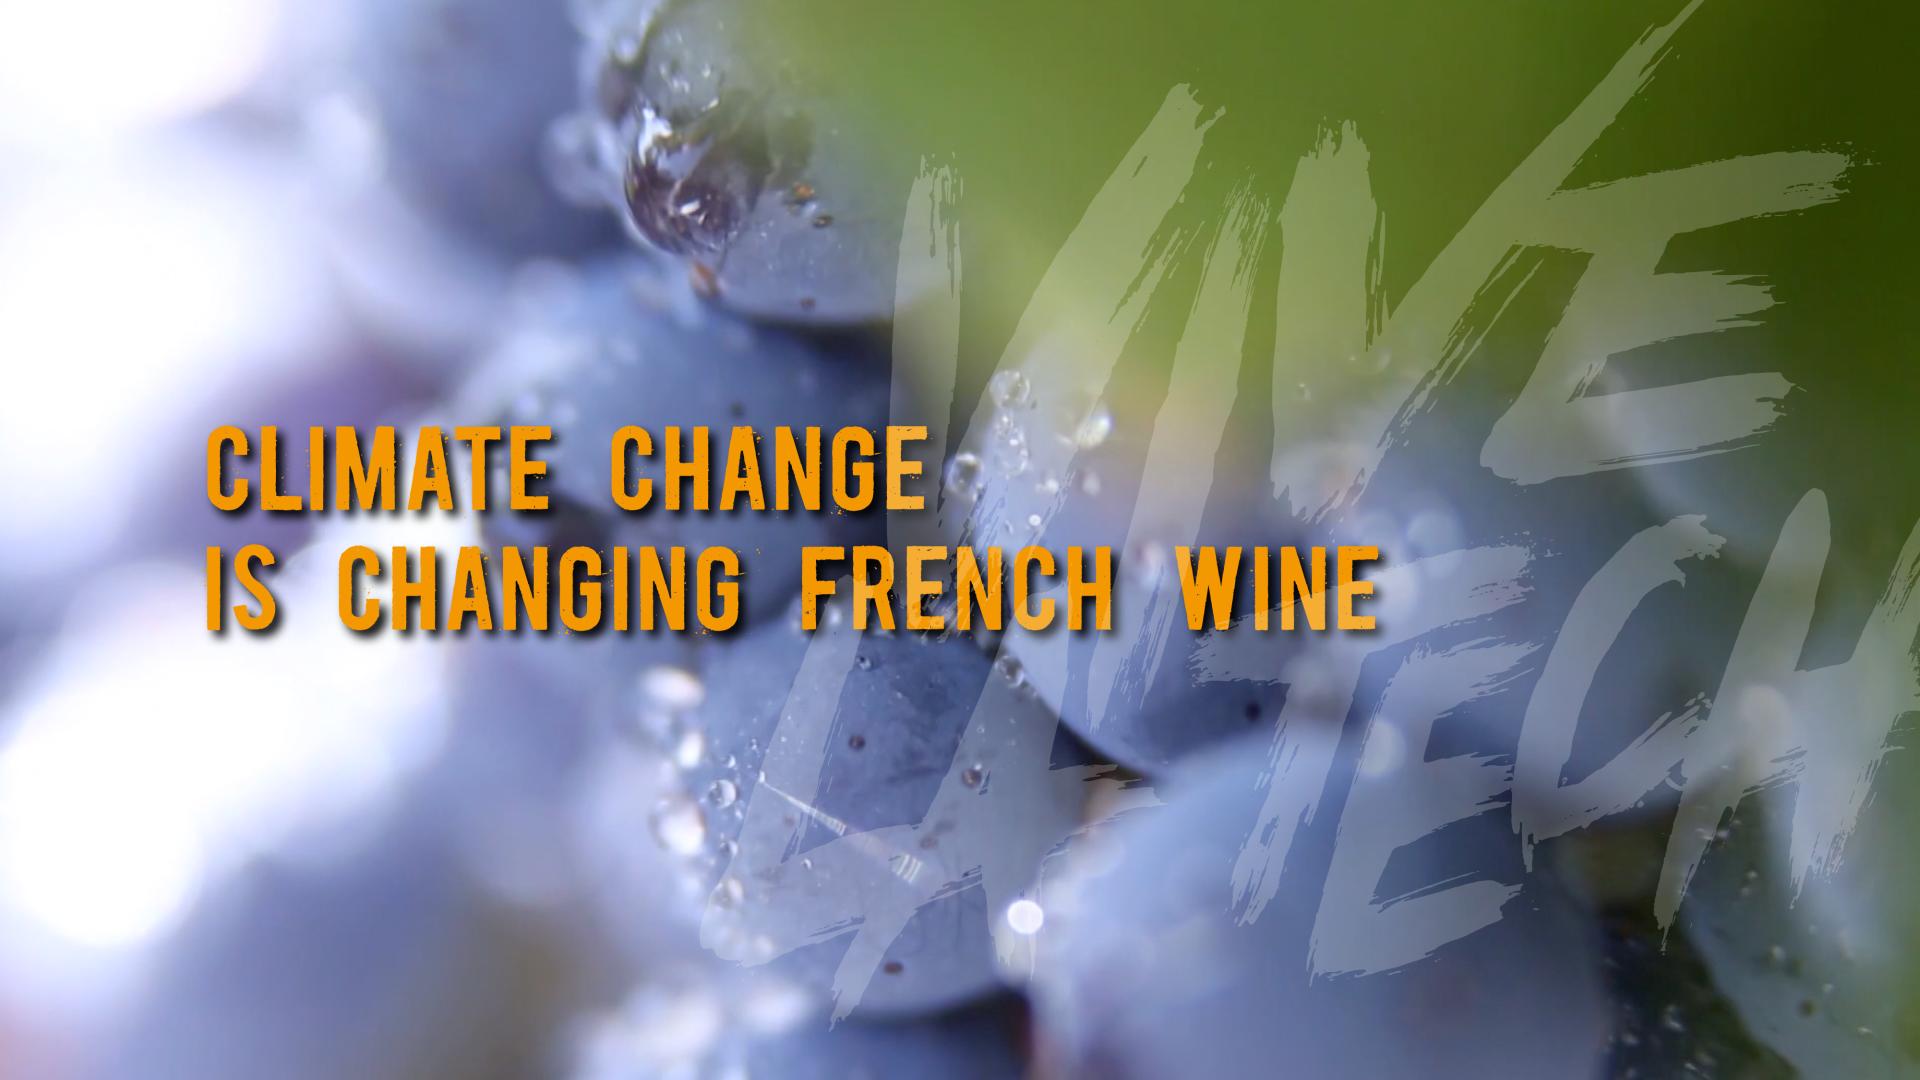 Vive la Tech: Climate change is changing French wine [Video]